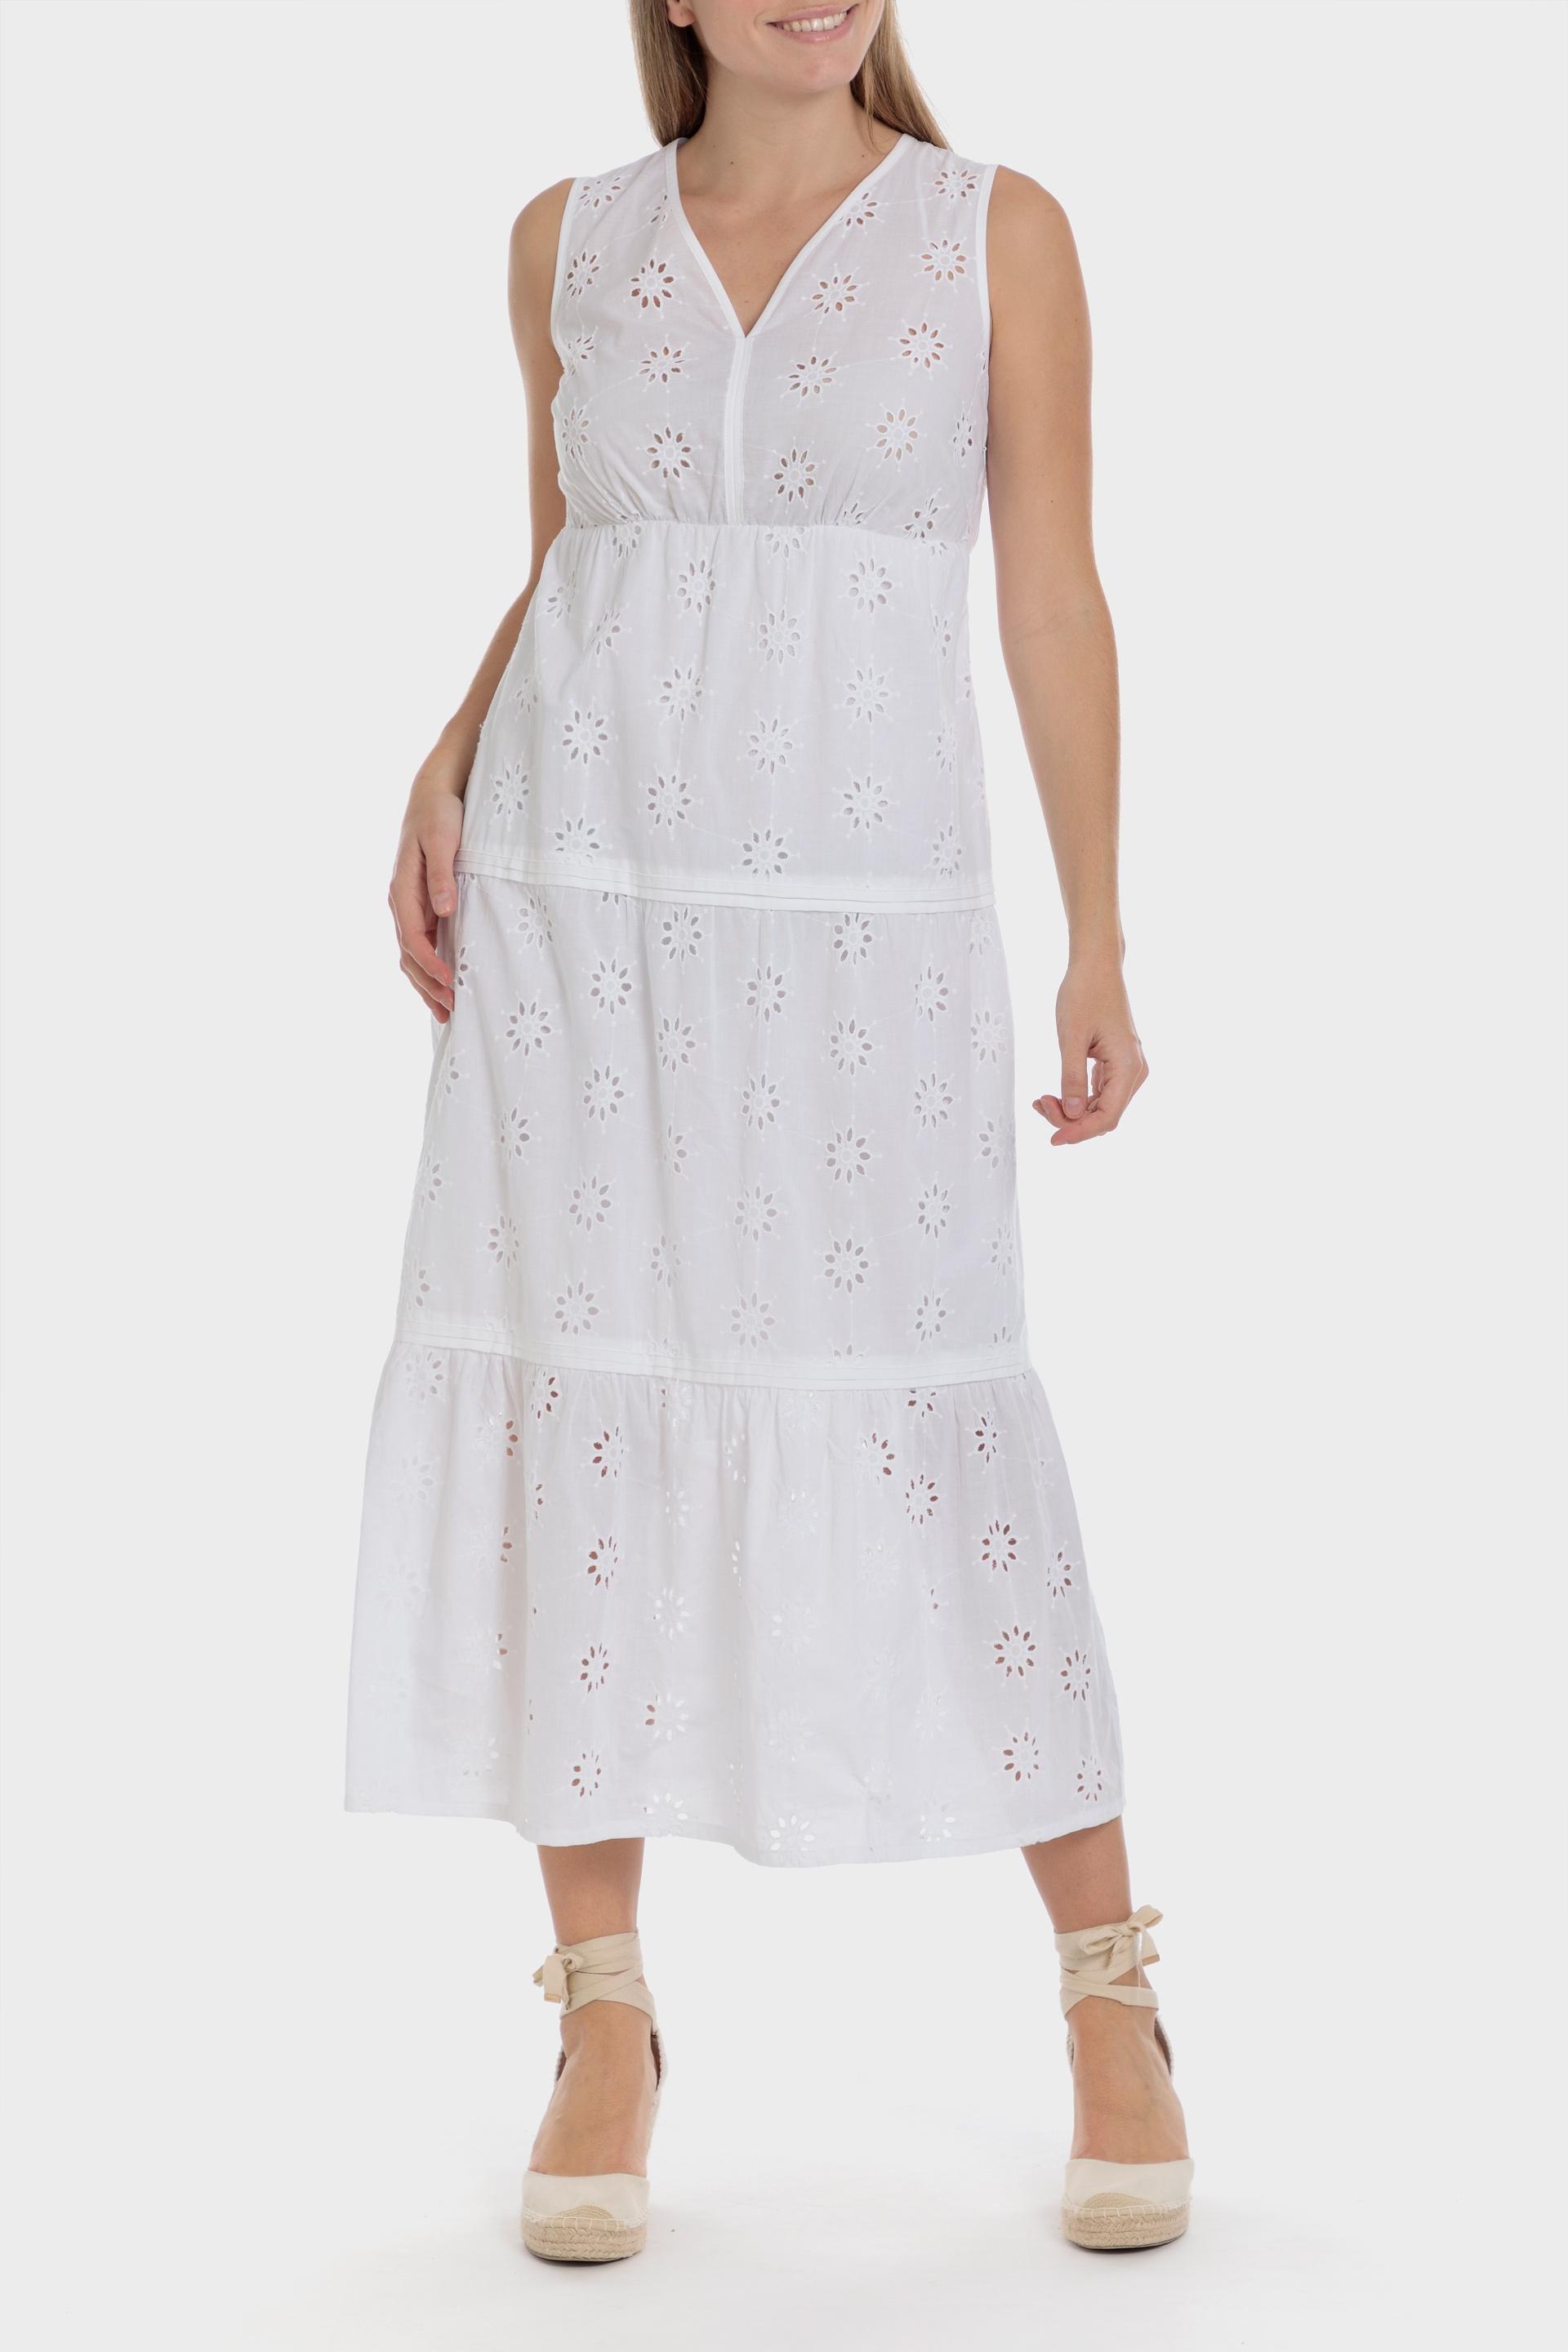 Punt Roma - White Embroidered Dress